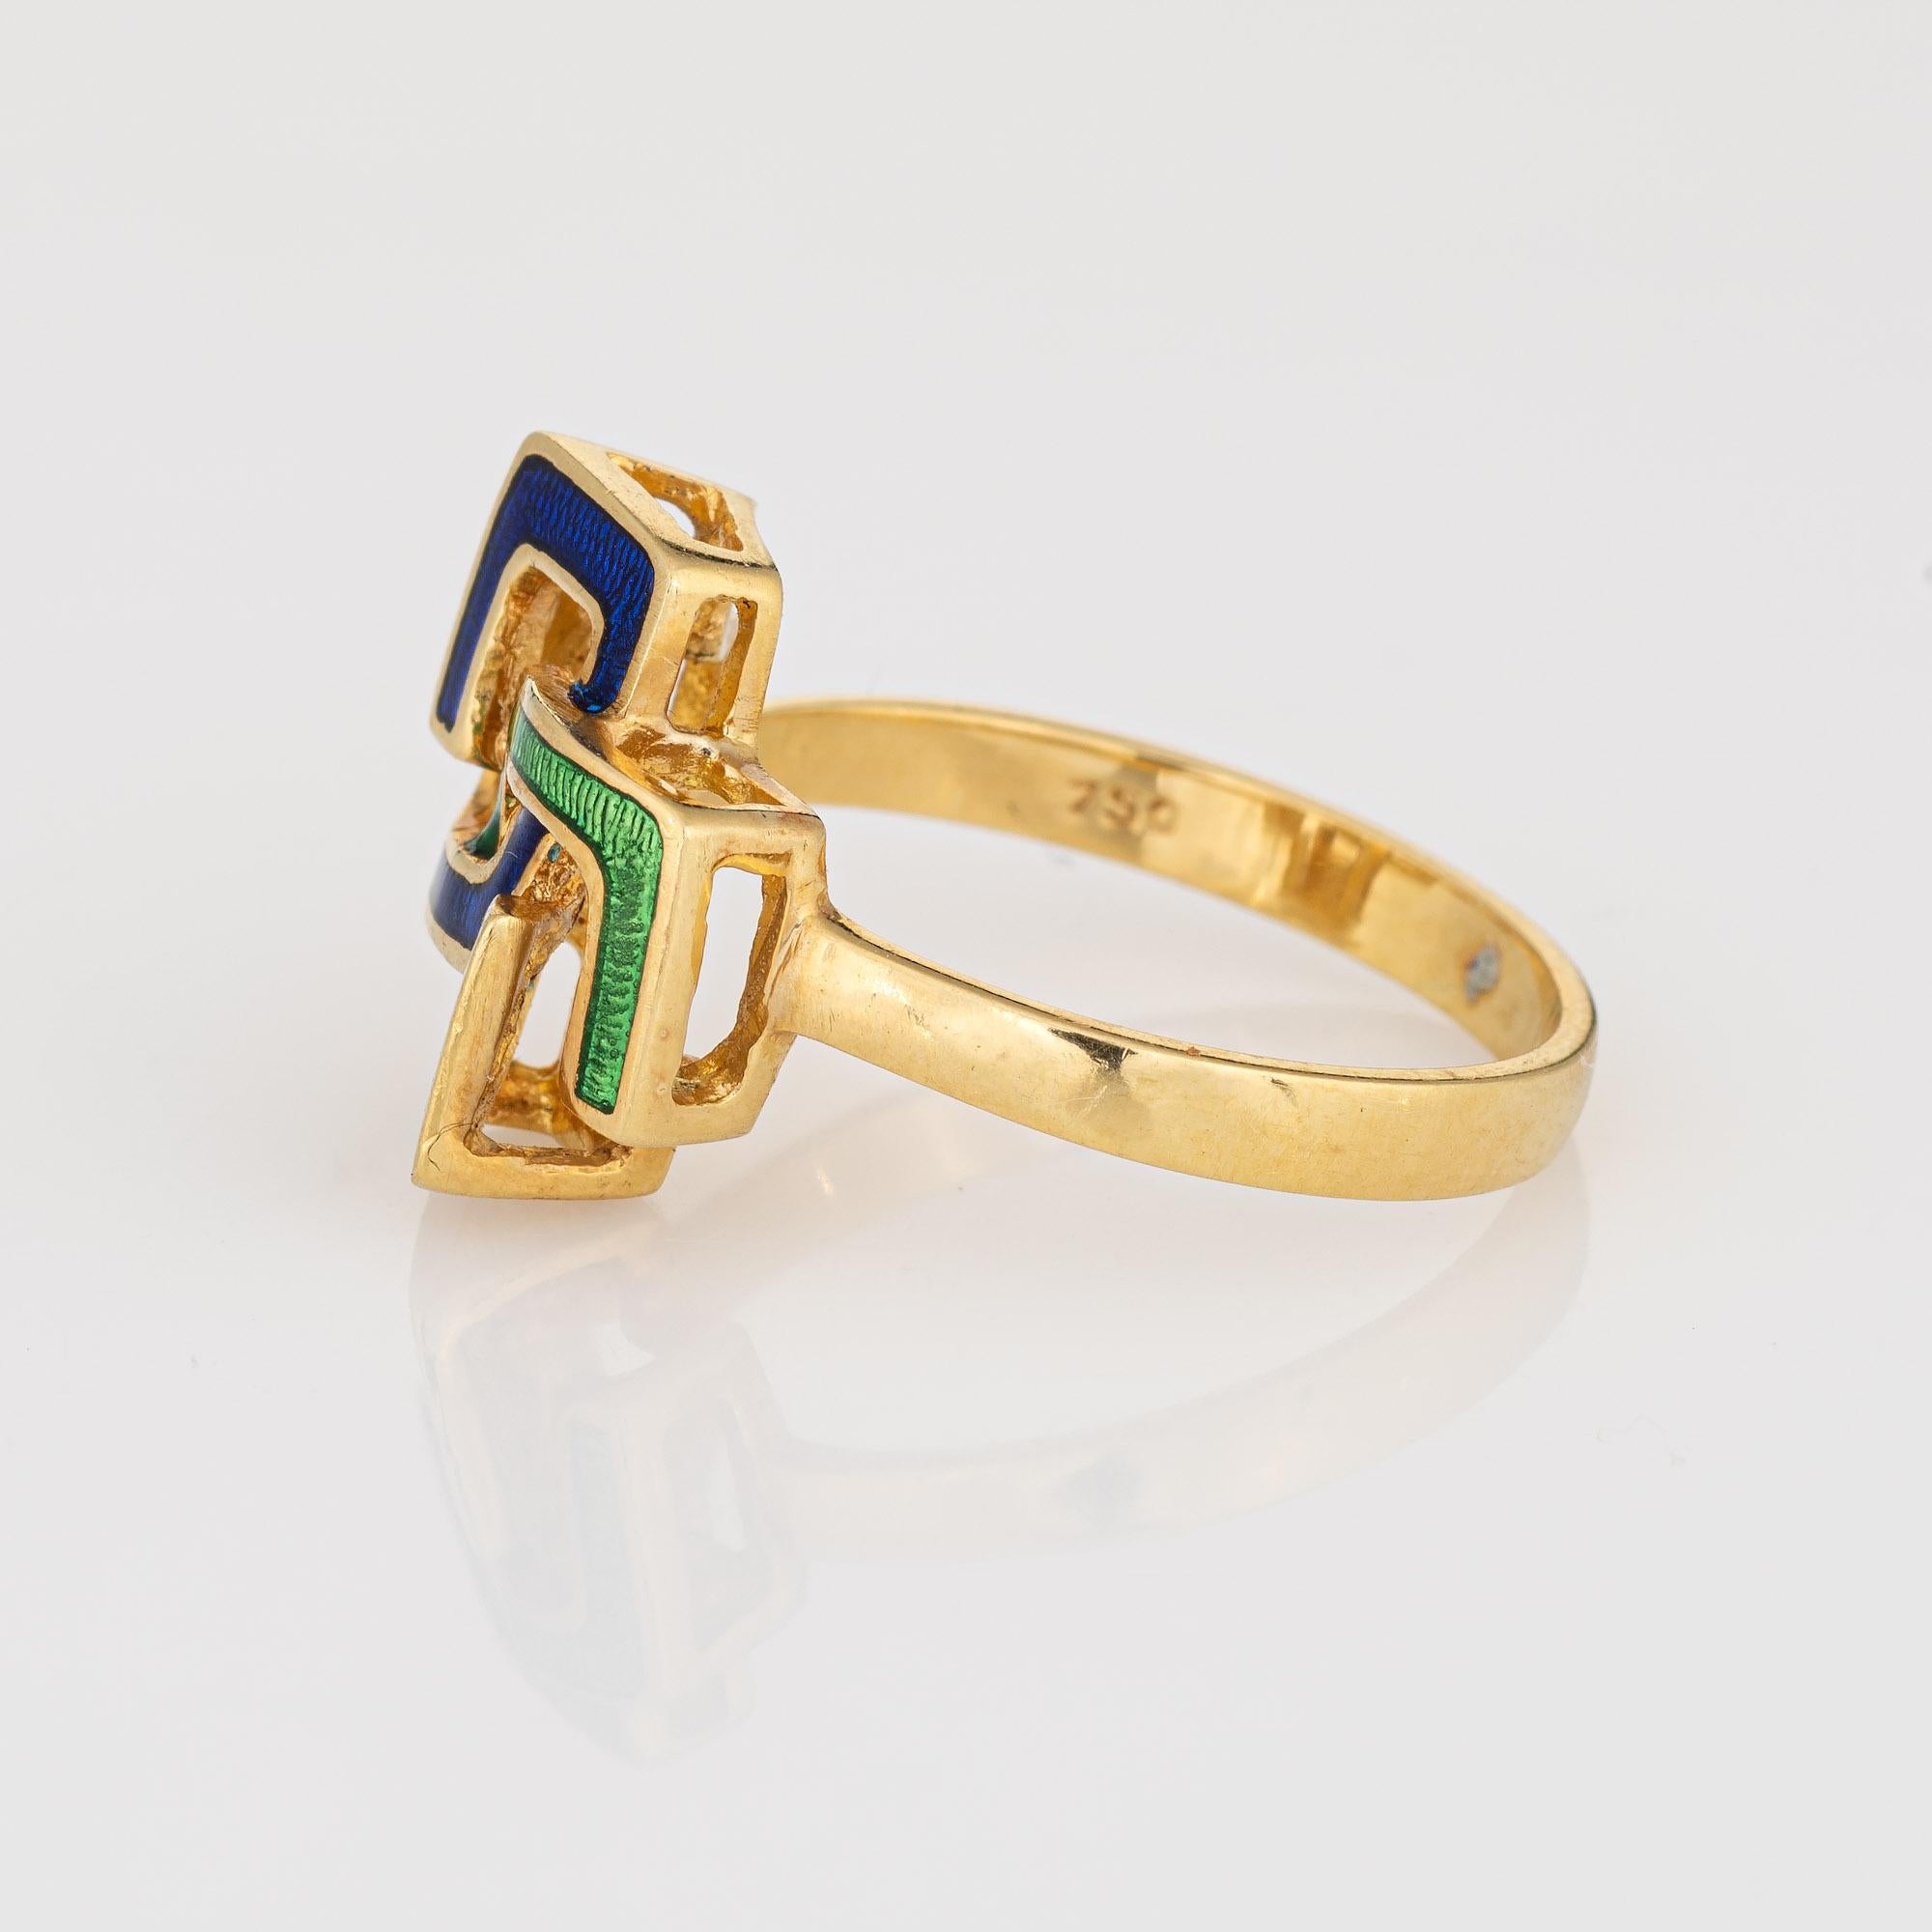 Interlocking Square Infinity Ring 6 Vintage Green Blue Enamel 18k Yellow Gold In Good Condition For Sale In Torrance, CA